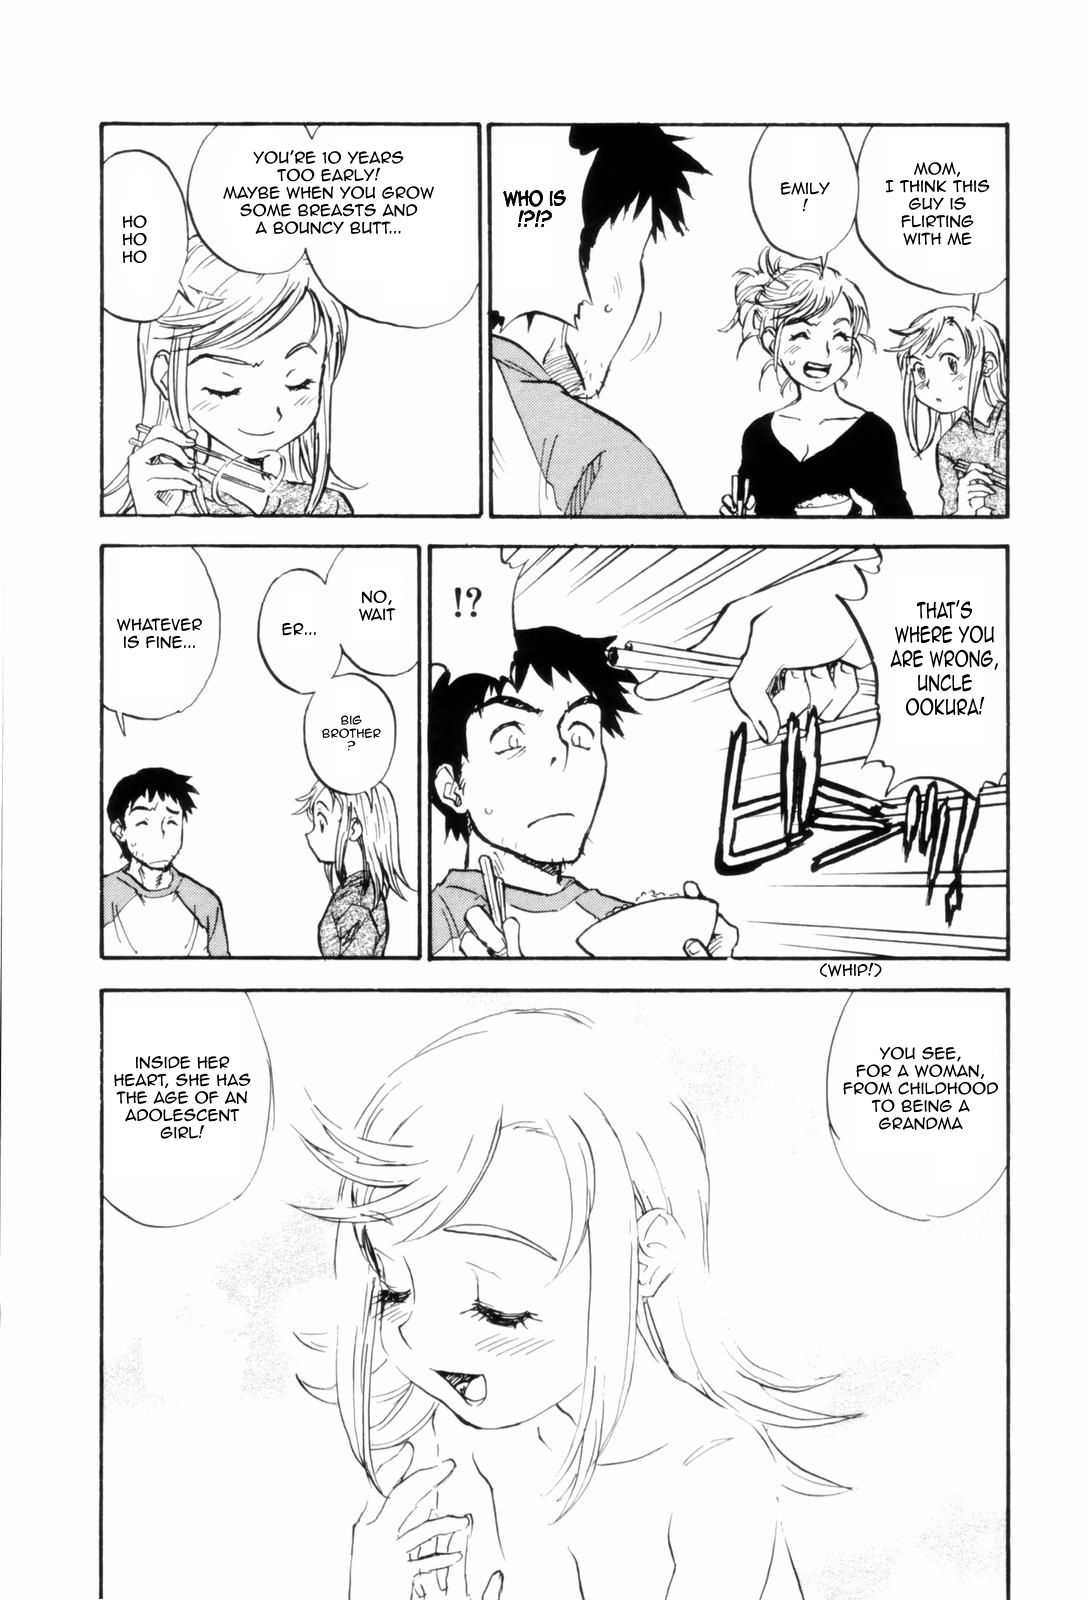 [Zerry] The Age of the Heart [ENG] 